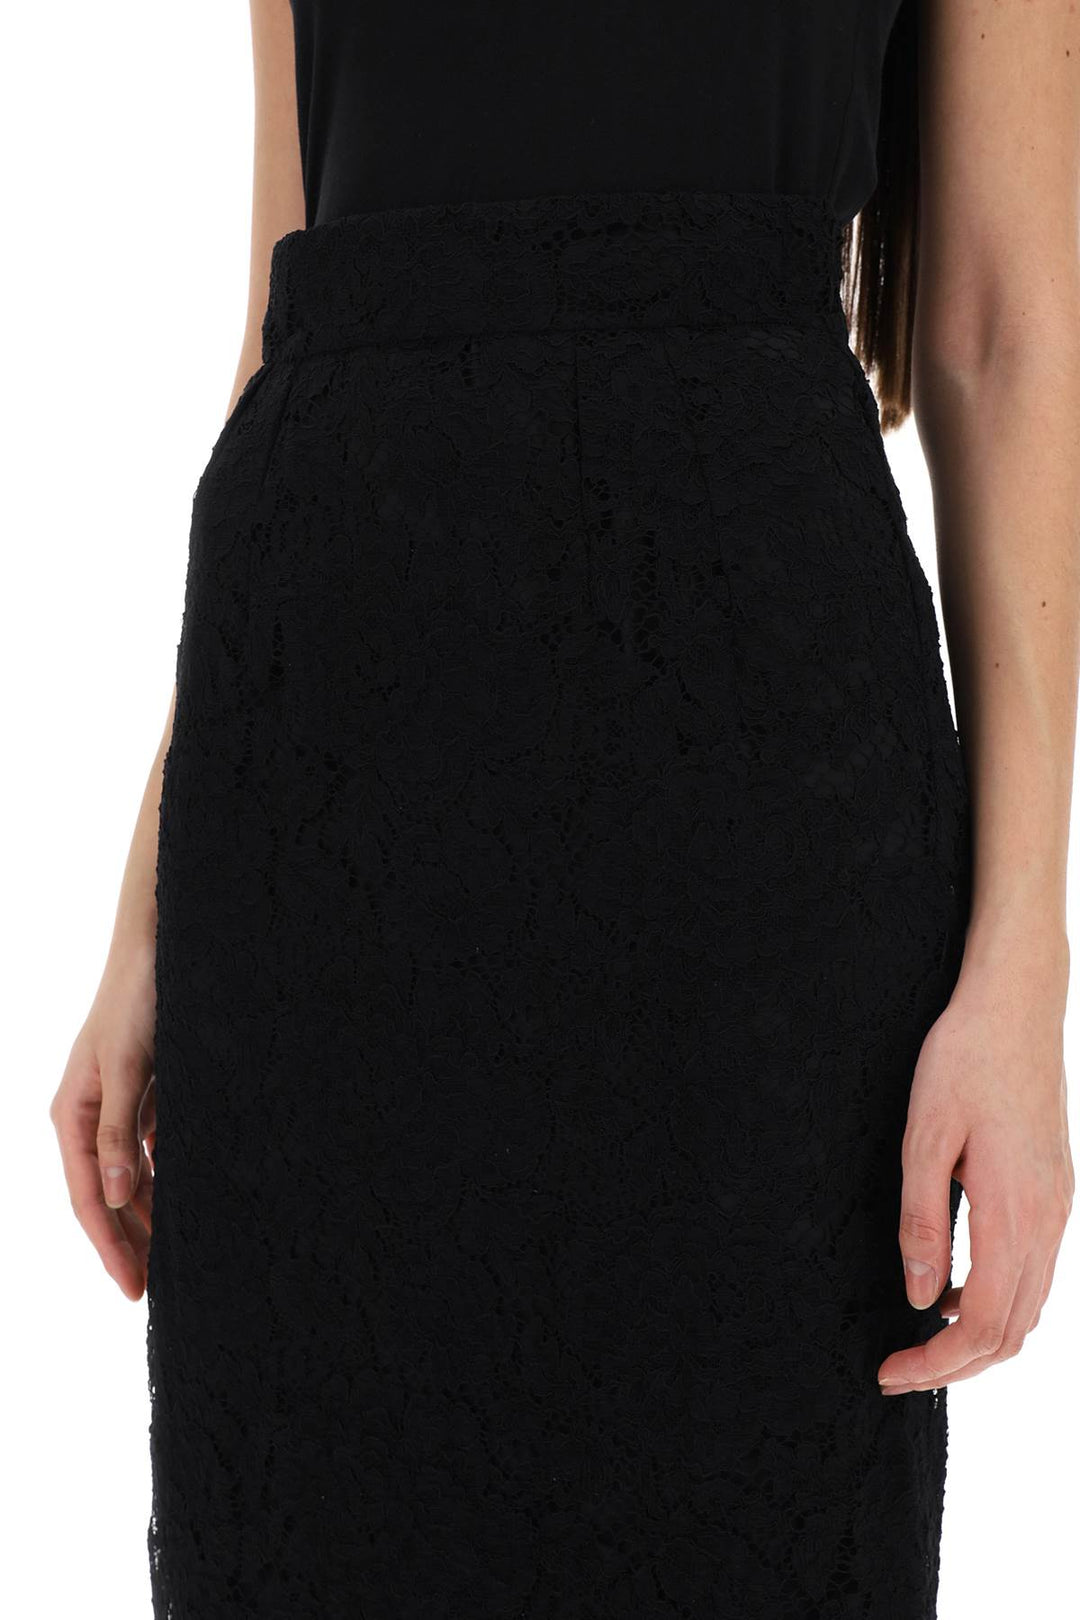 Dolce & Gabbana Lace Pencil Skirt With Tube Silhouette   Nero